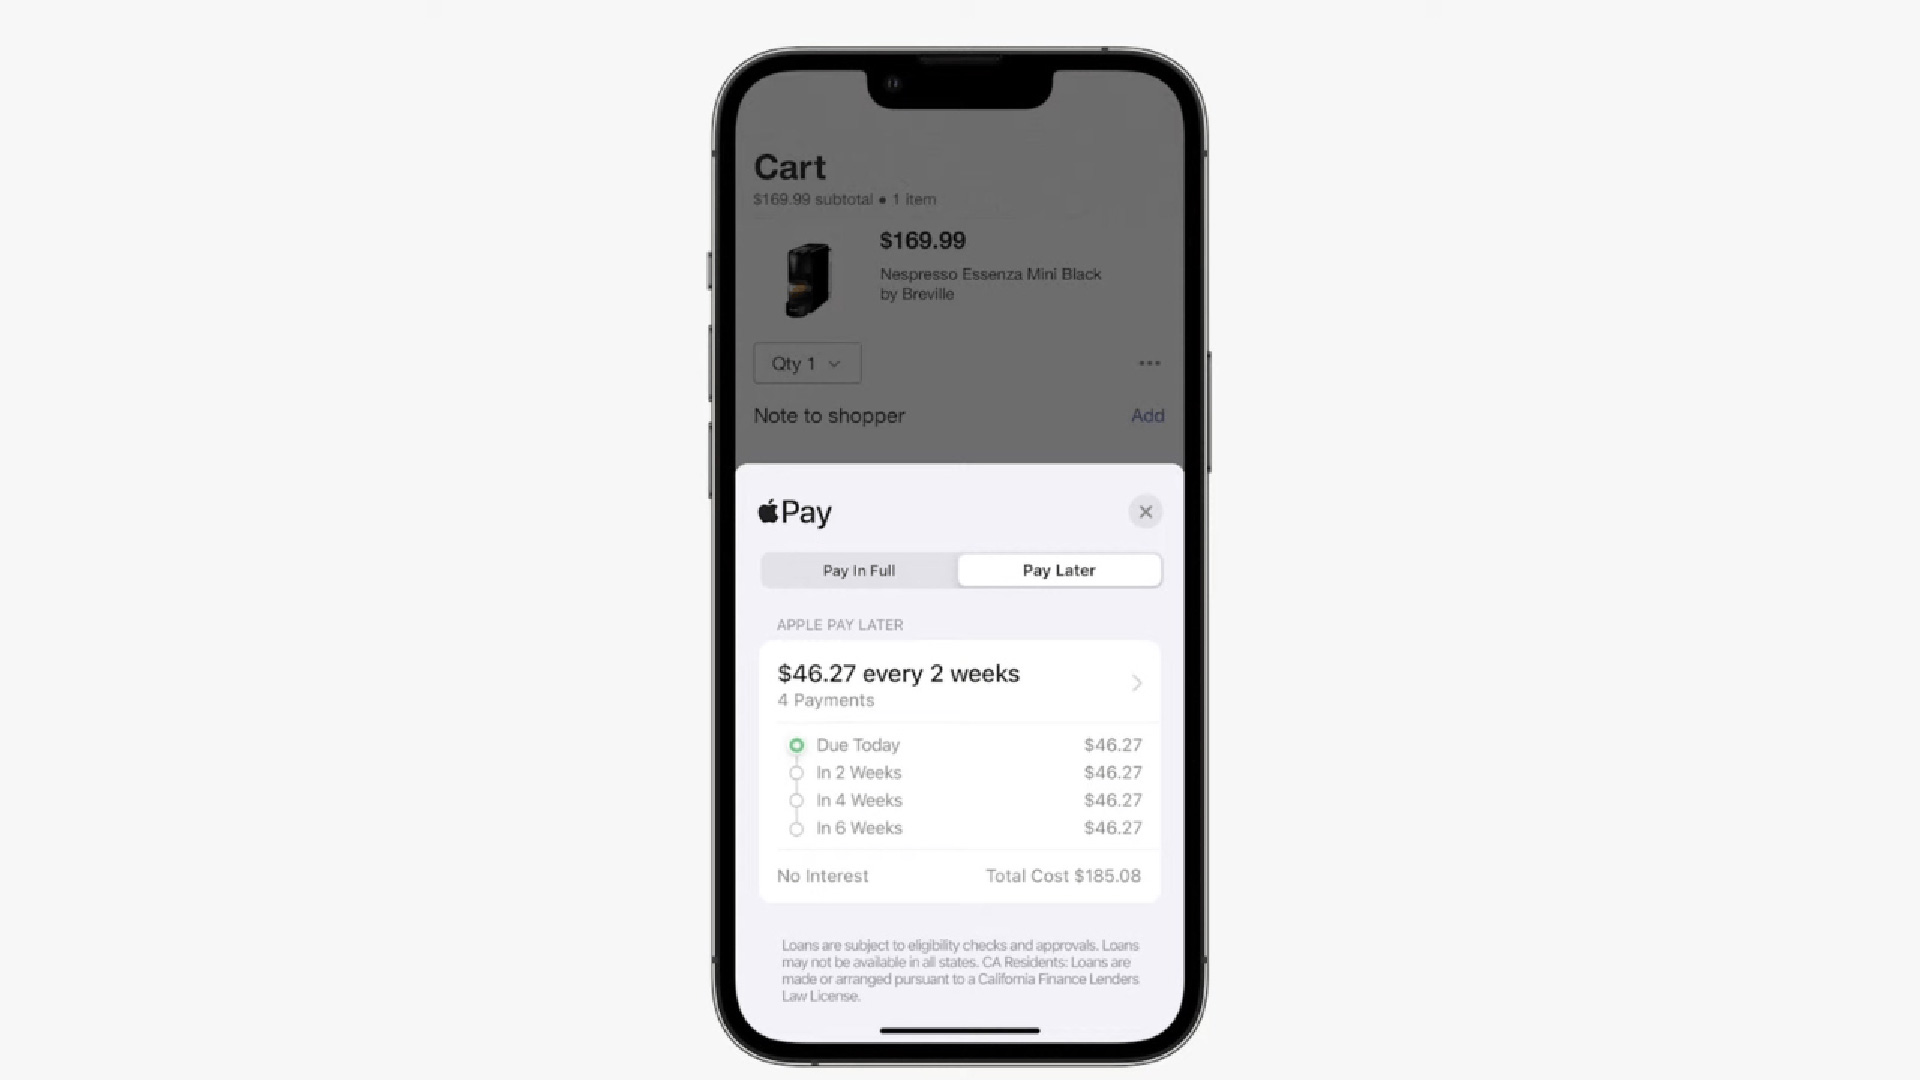 How to use Apple Pay Later?